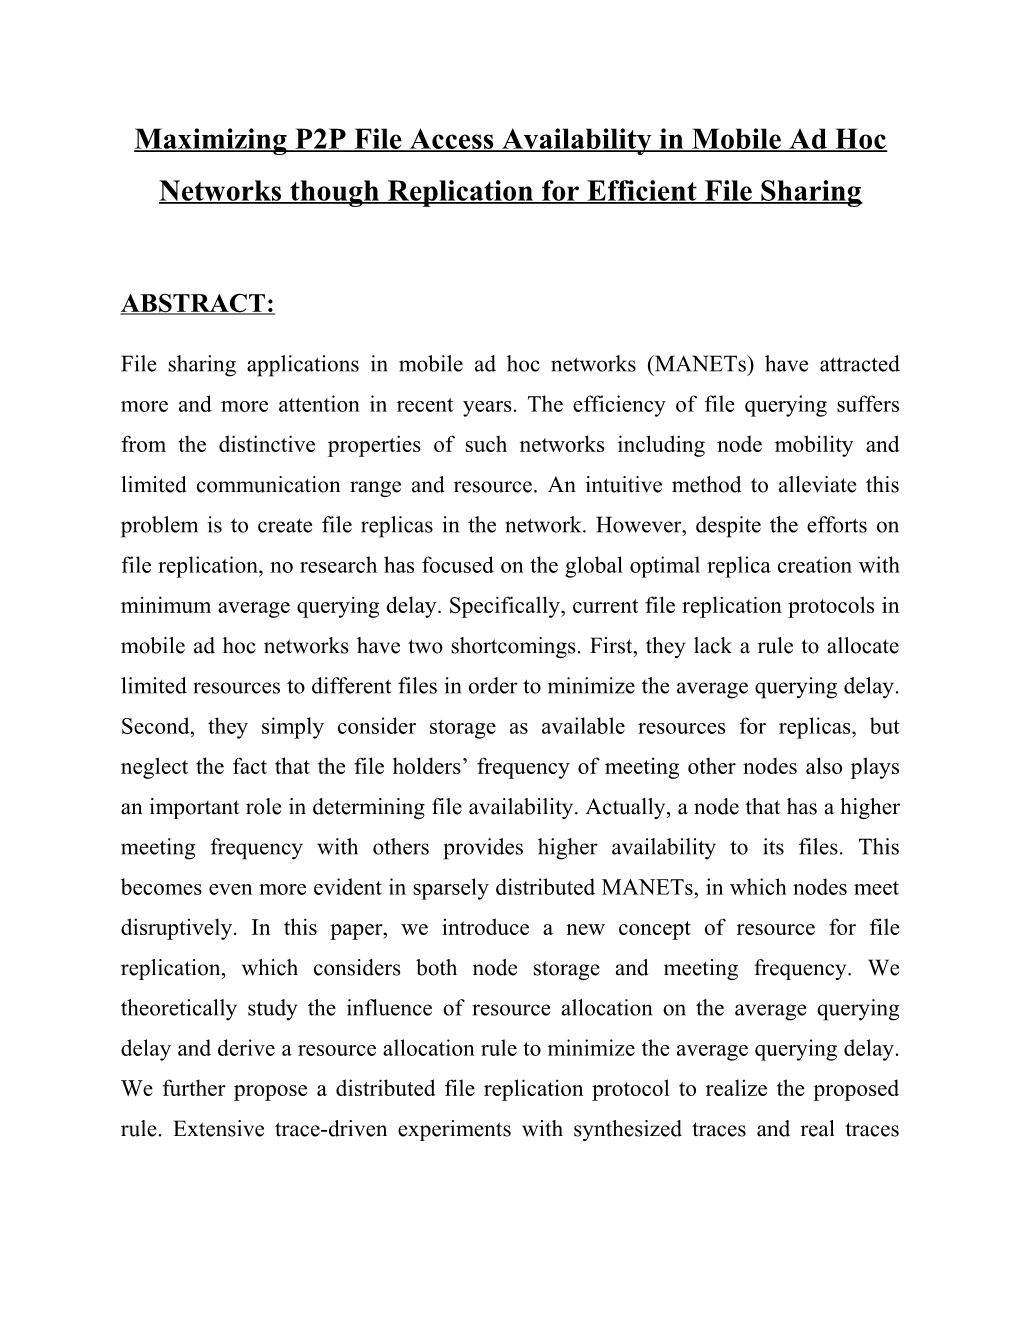 Maximizing P2P File Access Availability in Mobile Ad Hoc Networks Though Replication For